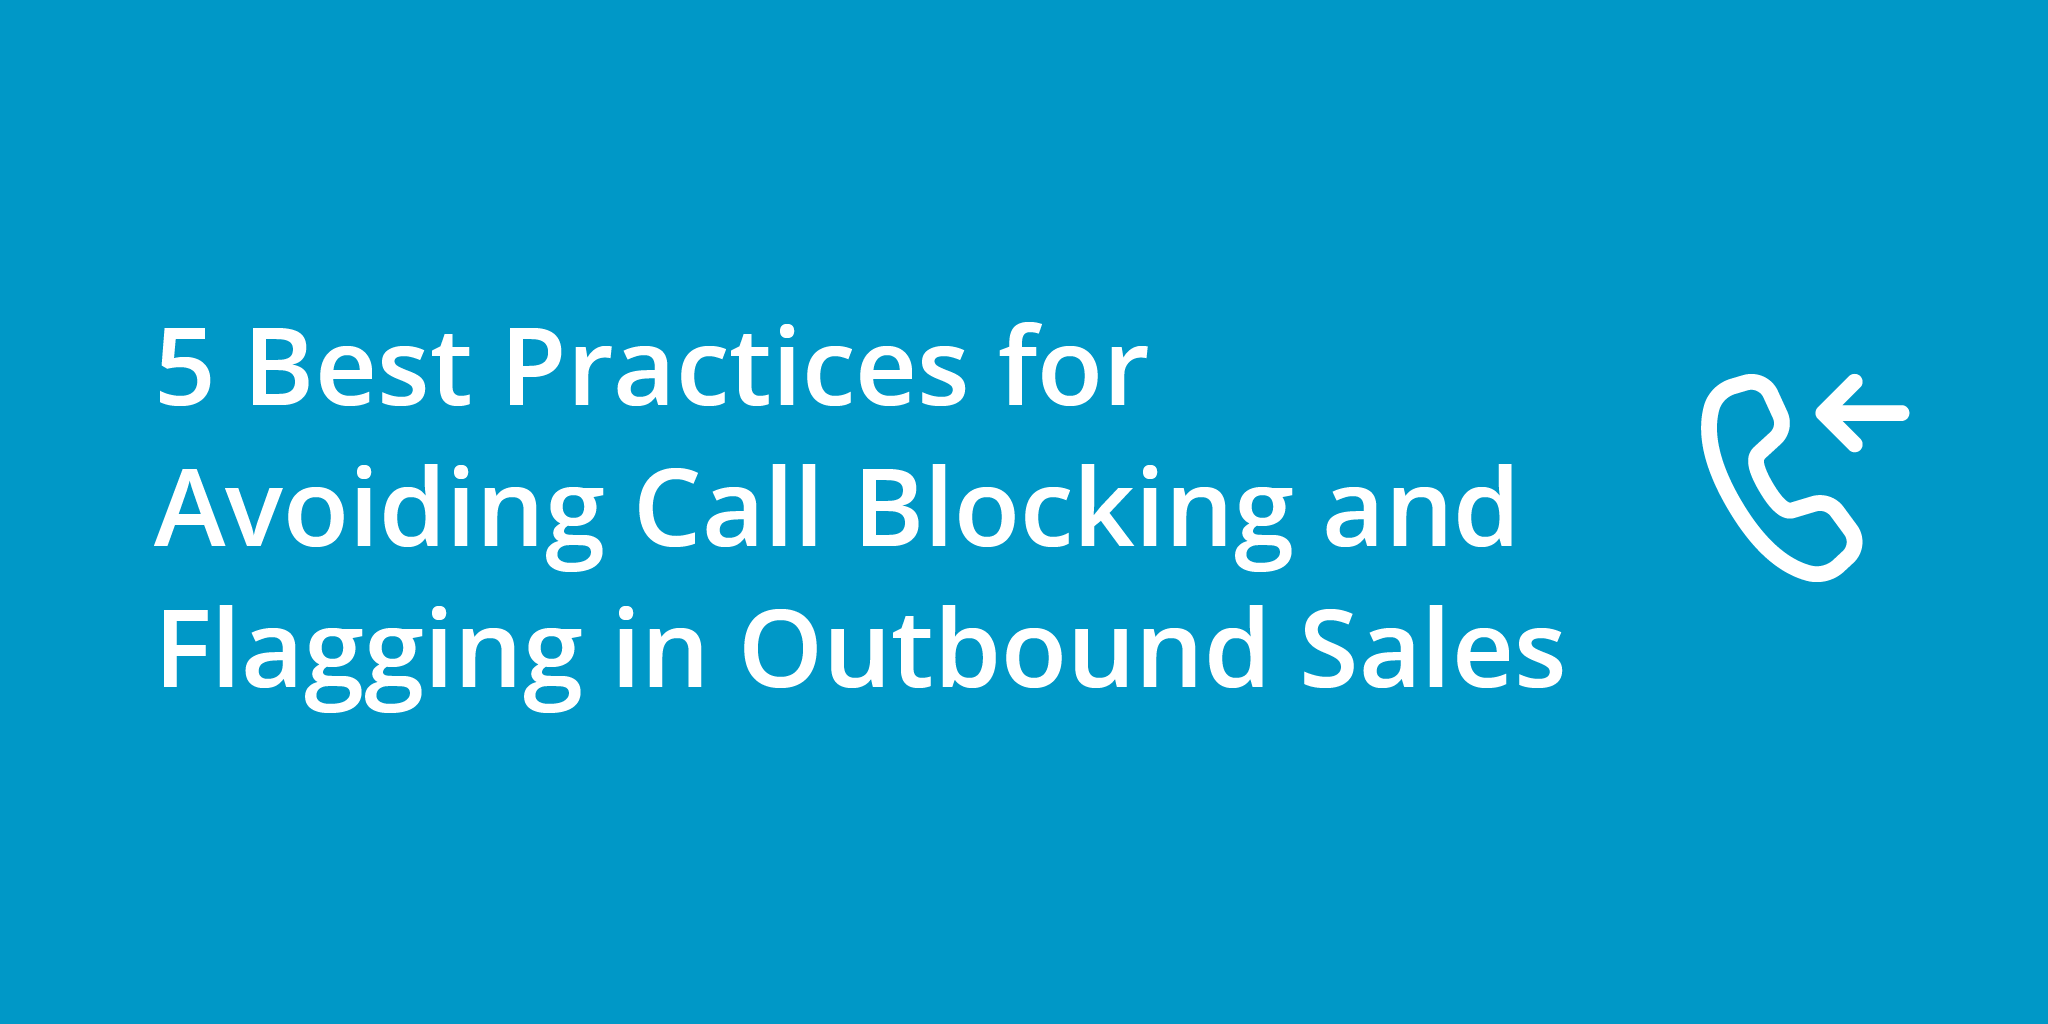 5 Best Practices for Avoiding Call Blocking and Flagging in Outbound Sales | Telephones for business